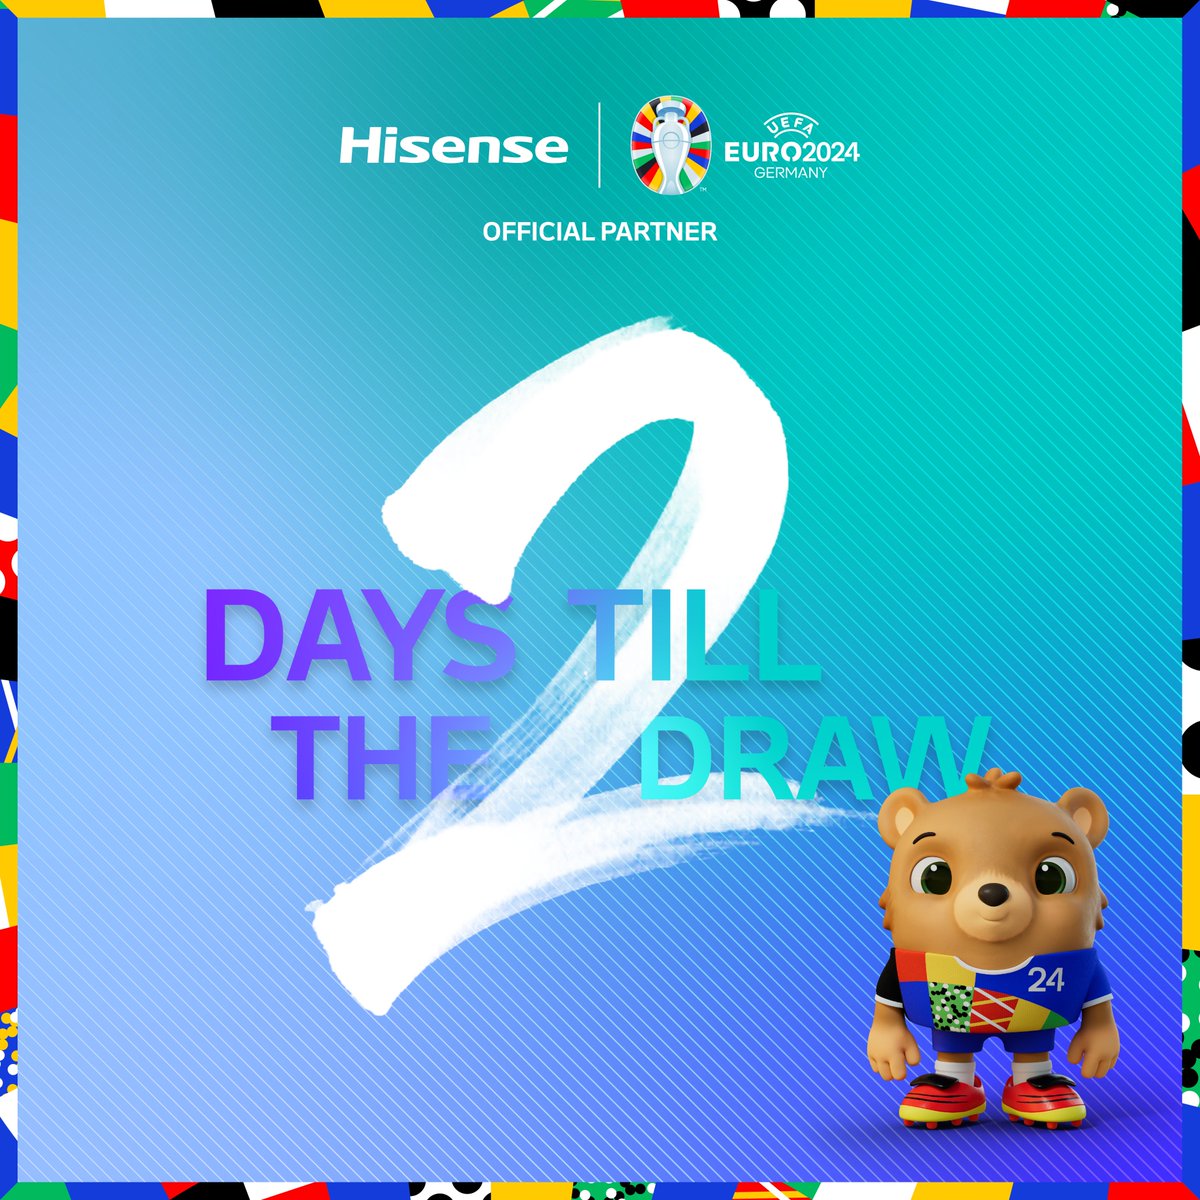 Two days to go until the group-stage draw for UEFA EURO 2024ᵀᴹ! Who is the one team you’re hoping your nation avoids in the upcoming draw? #EURO2024 #HisenseEURO2024Challenge #EURO2024officialdraw